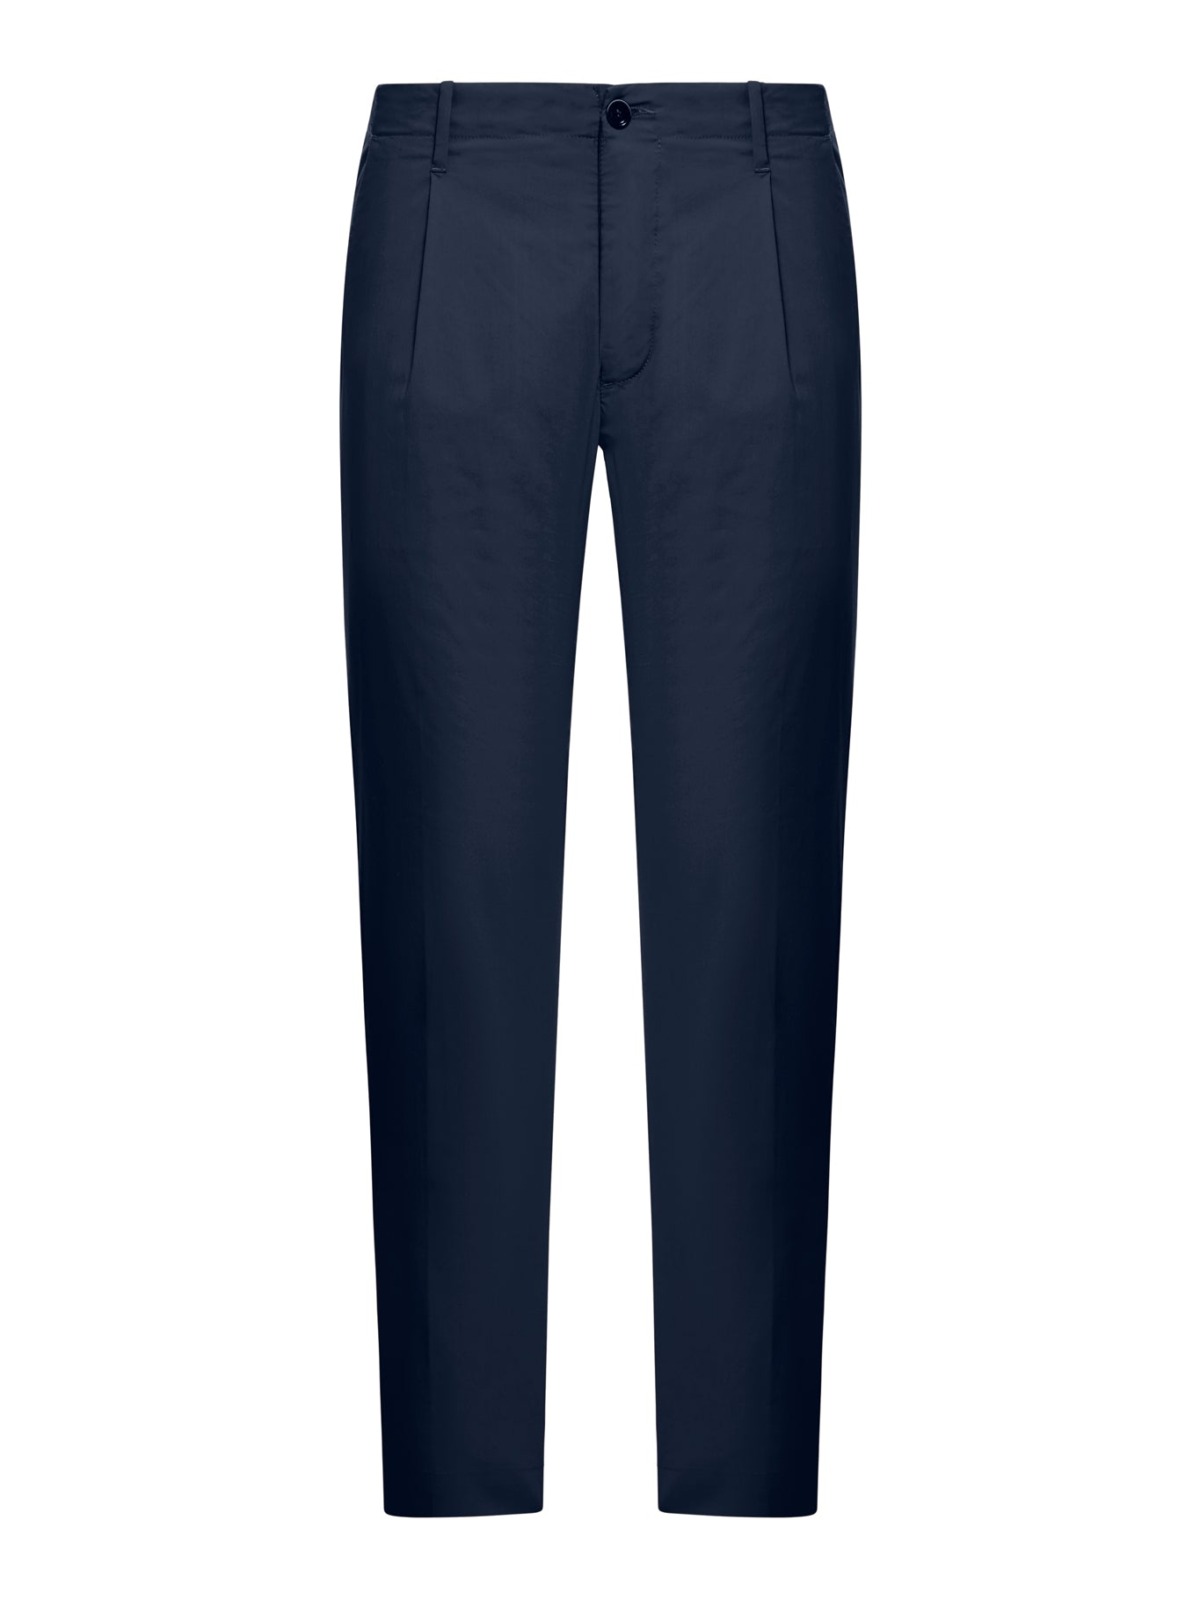 Nine In The Morning Blue Gent Trousers - Suitnegozi GOOFASH